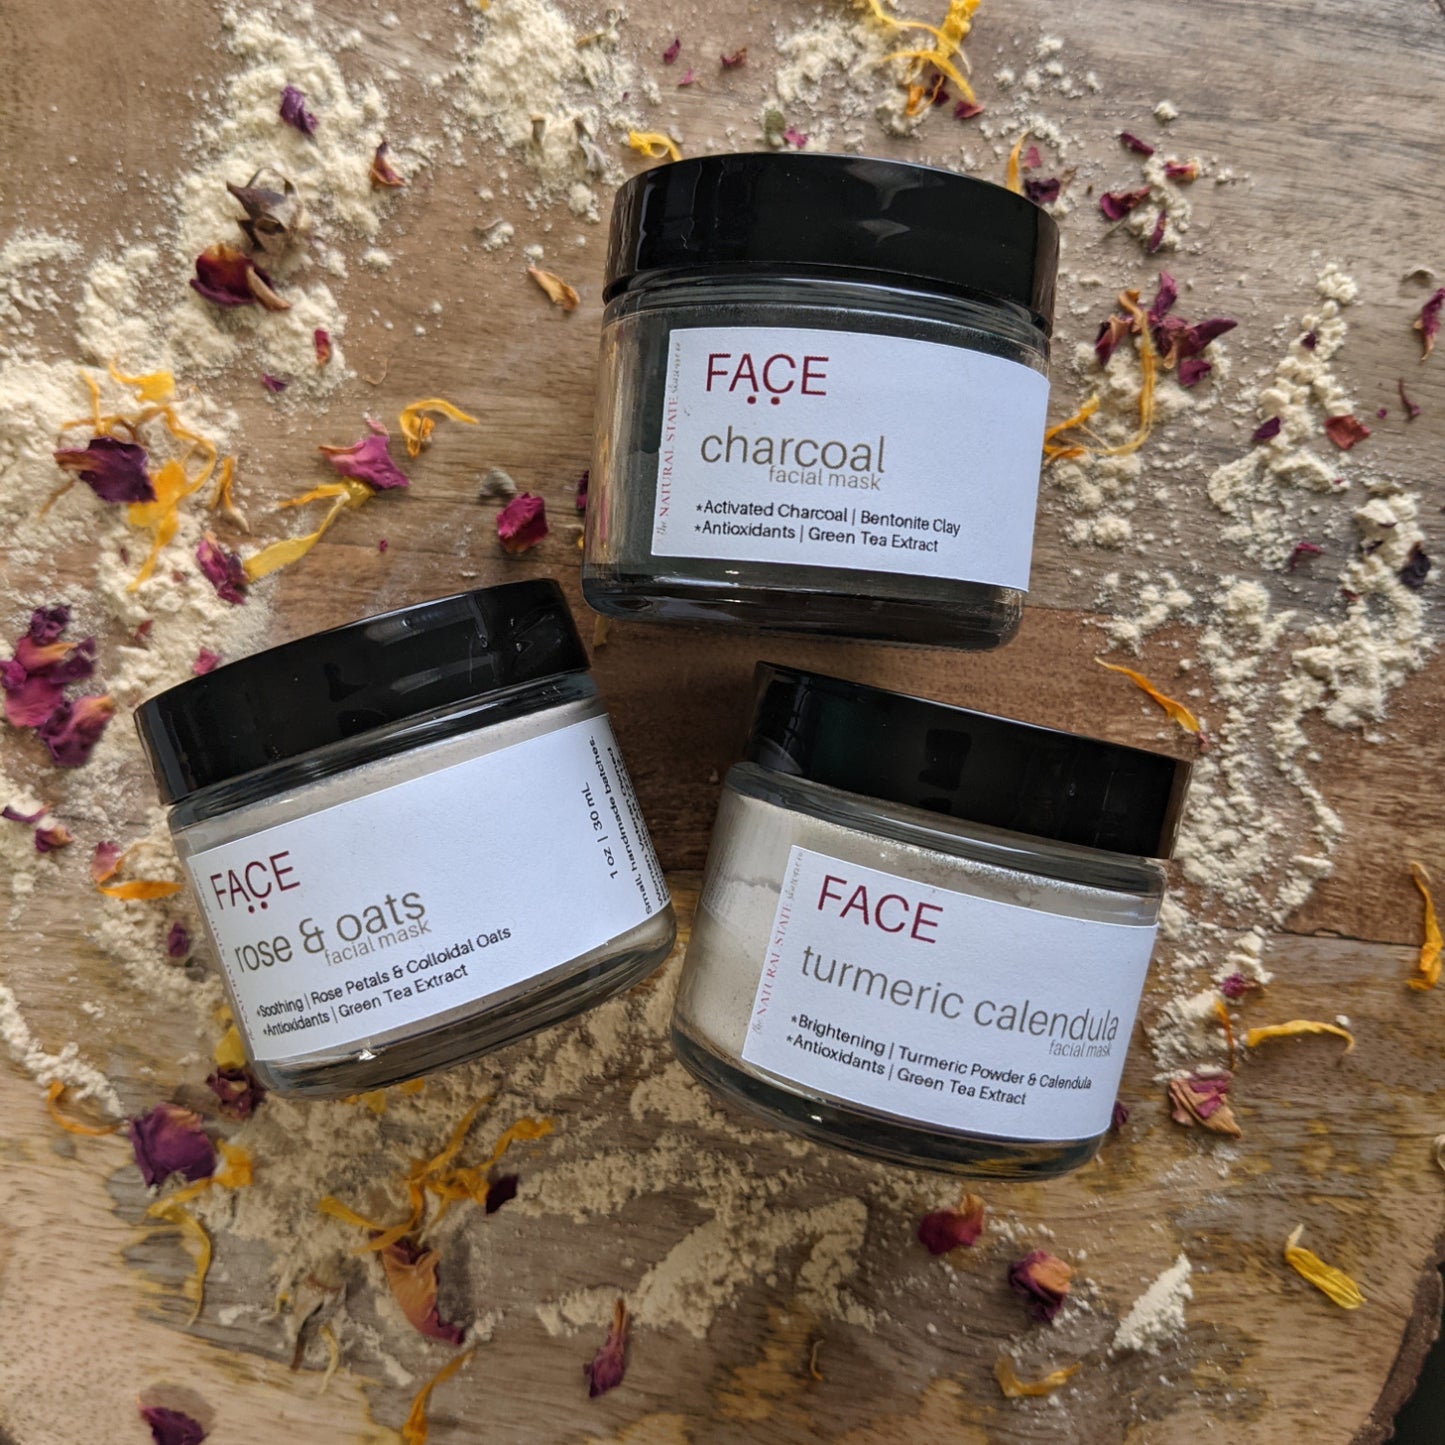 Facial Mask | Calm Clay Face Mask with Rose & Oats